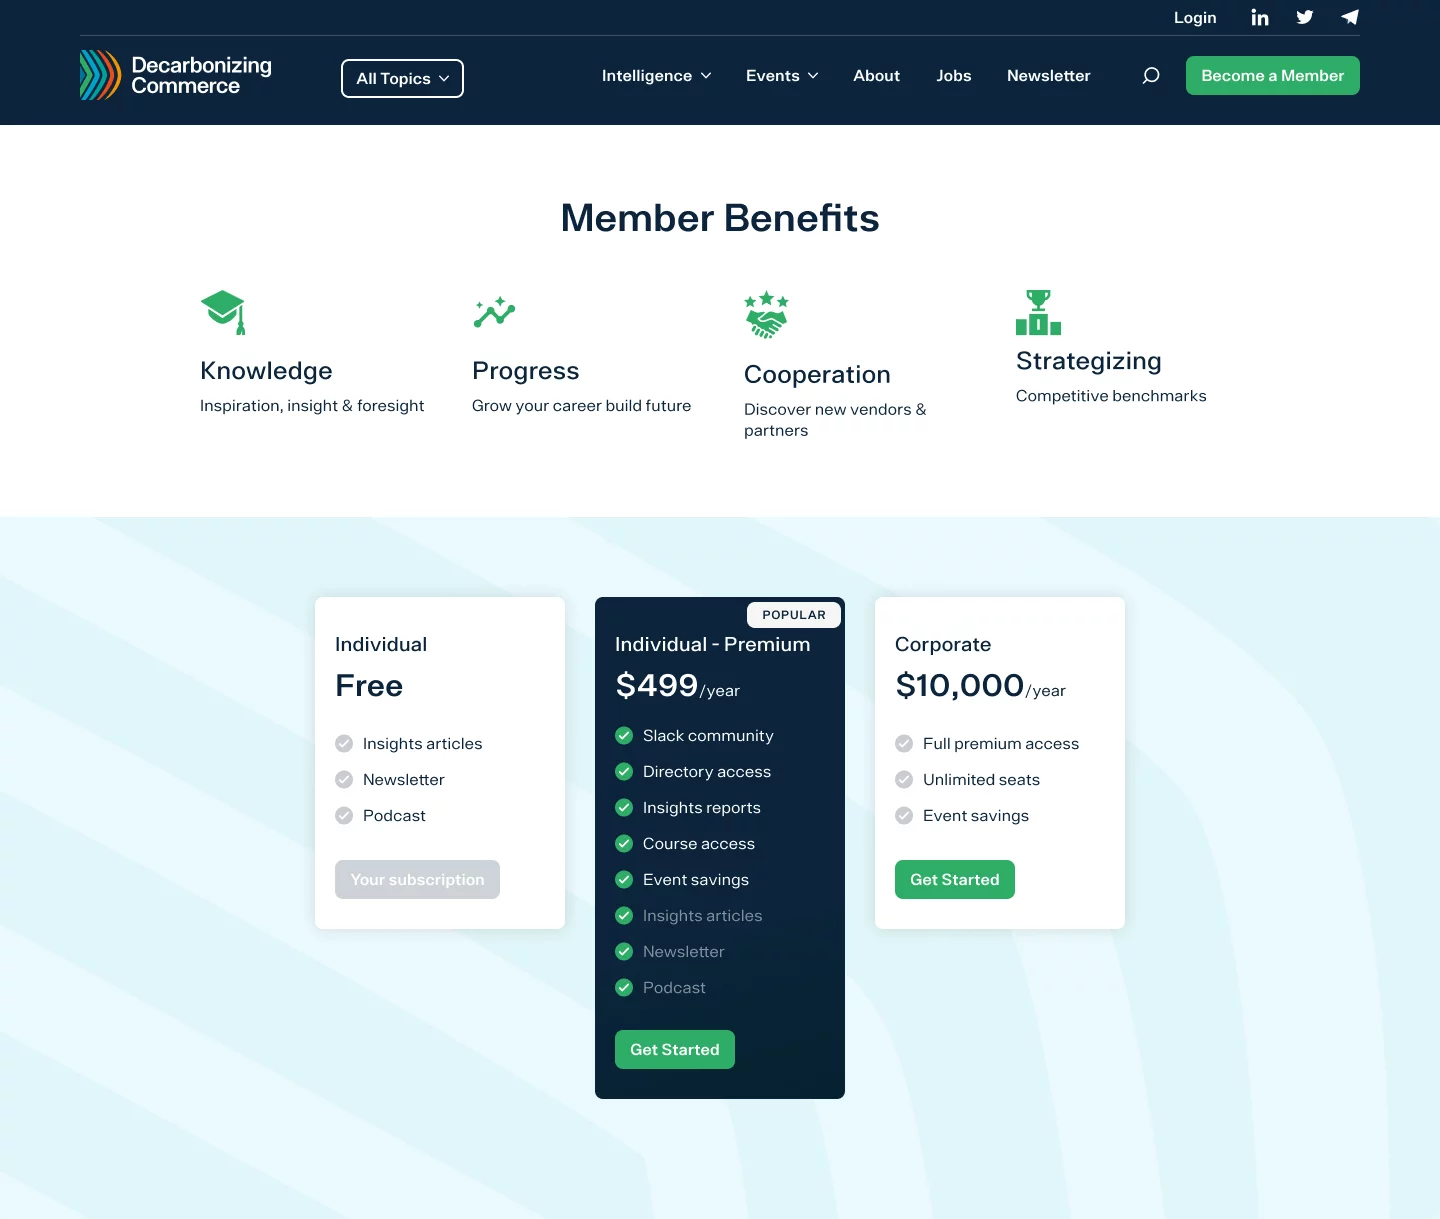 Decarbcommerce_Member Benefits